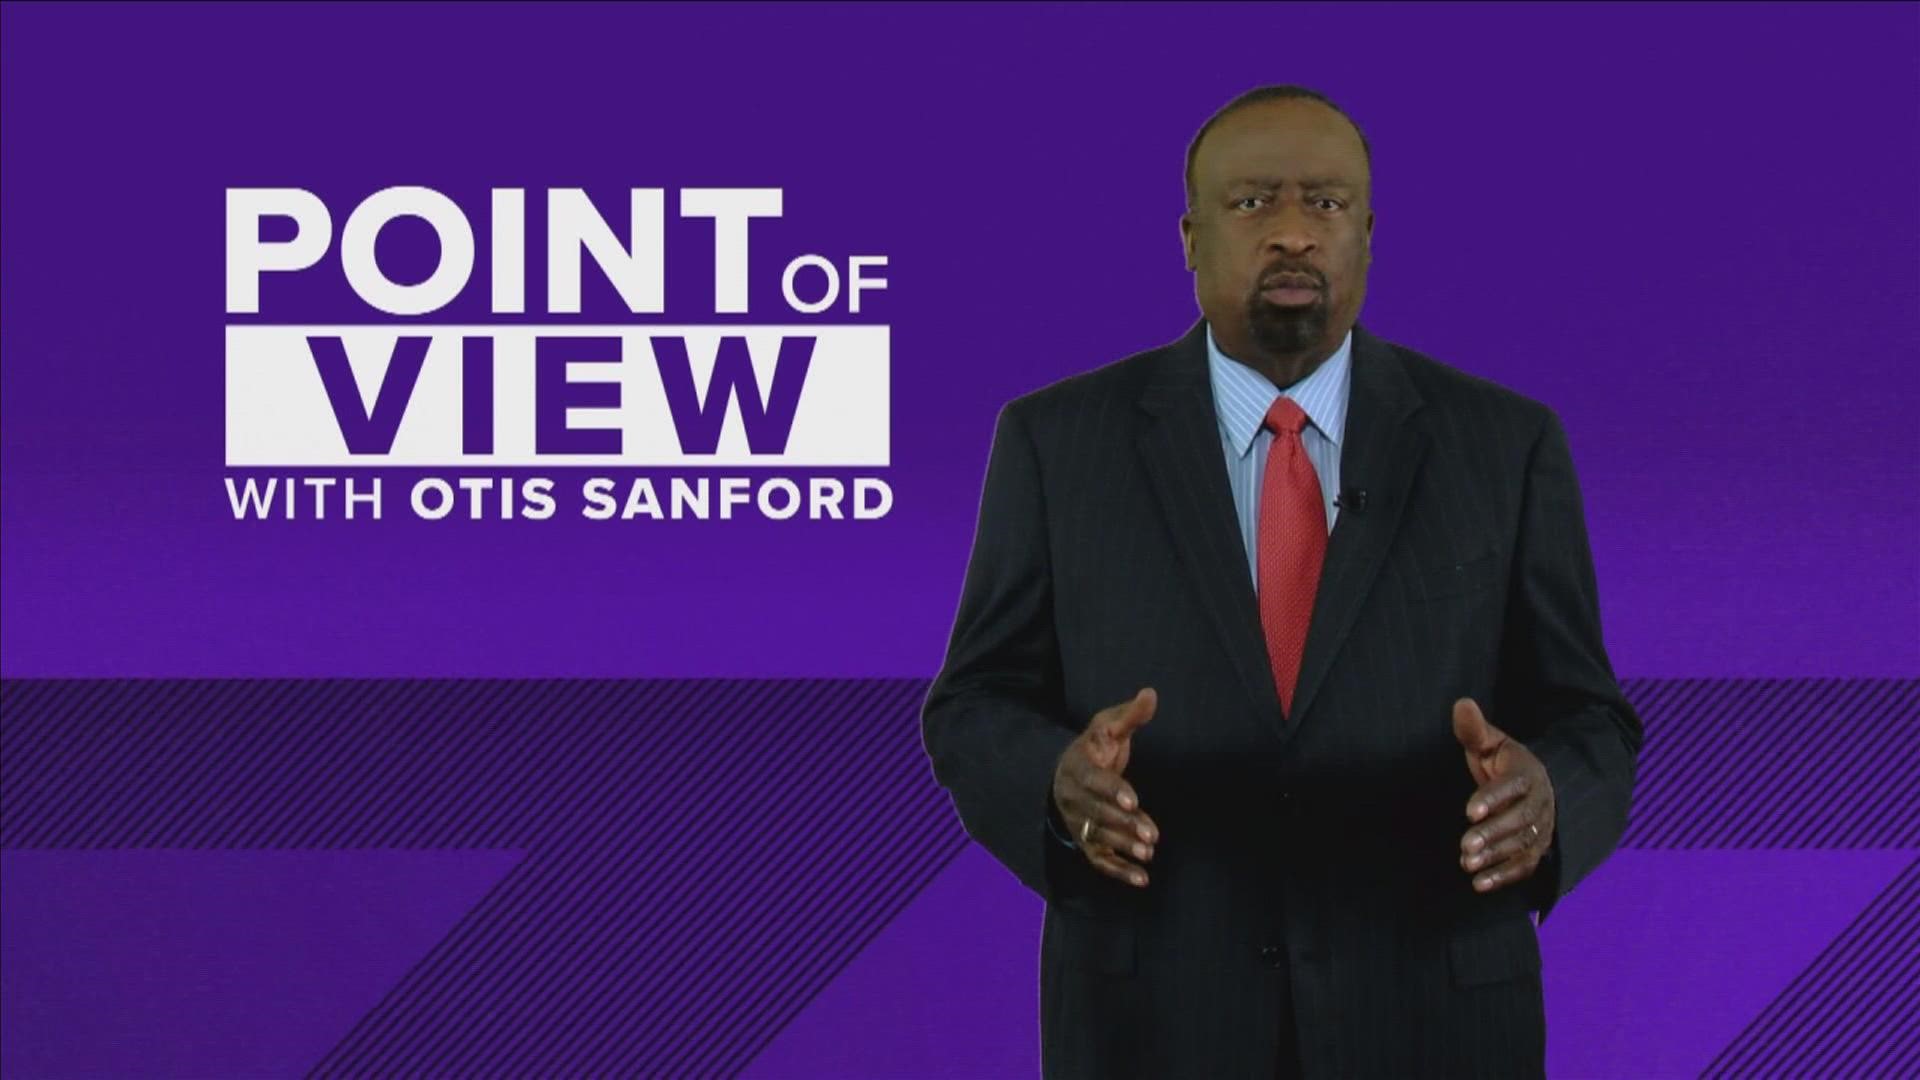 ABC24 political analyst and commentator Otis Sanford shared his point of view on the Mississippi welfare scandal involving Brett Favre.